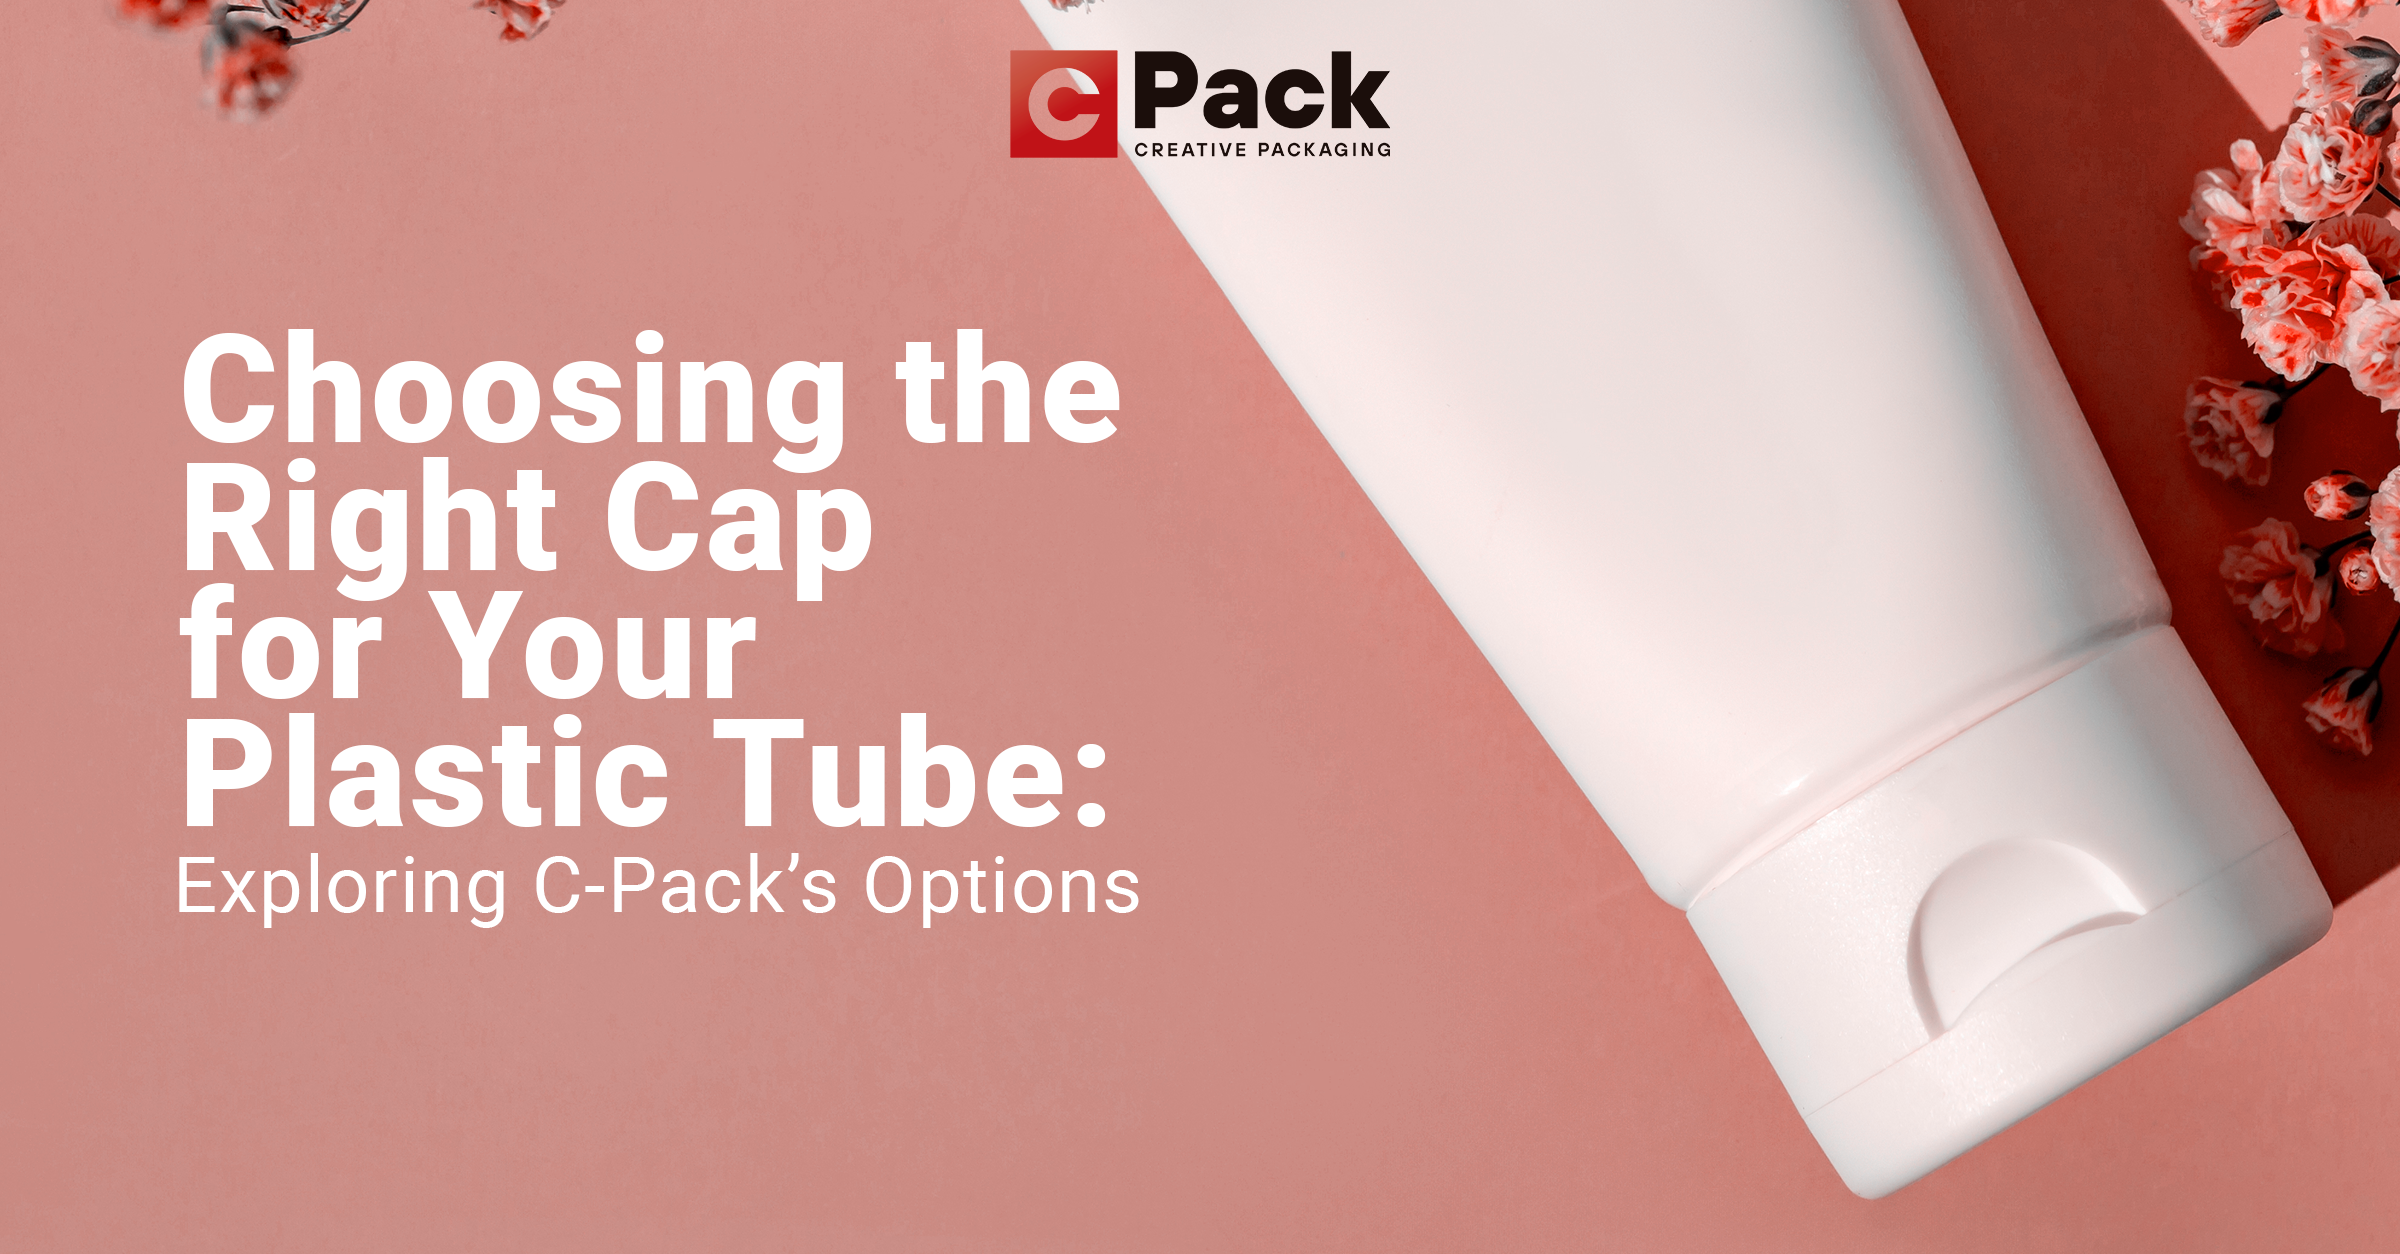 Image displaying different cap options for plastic tubes, showcasing C-Pack's range of choices for customers.